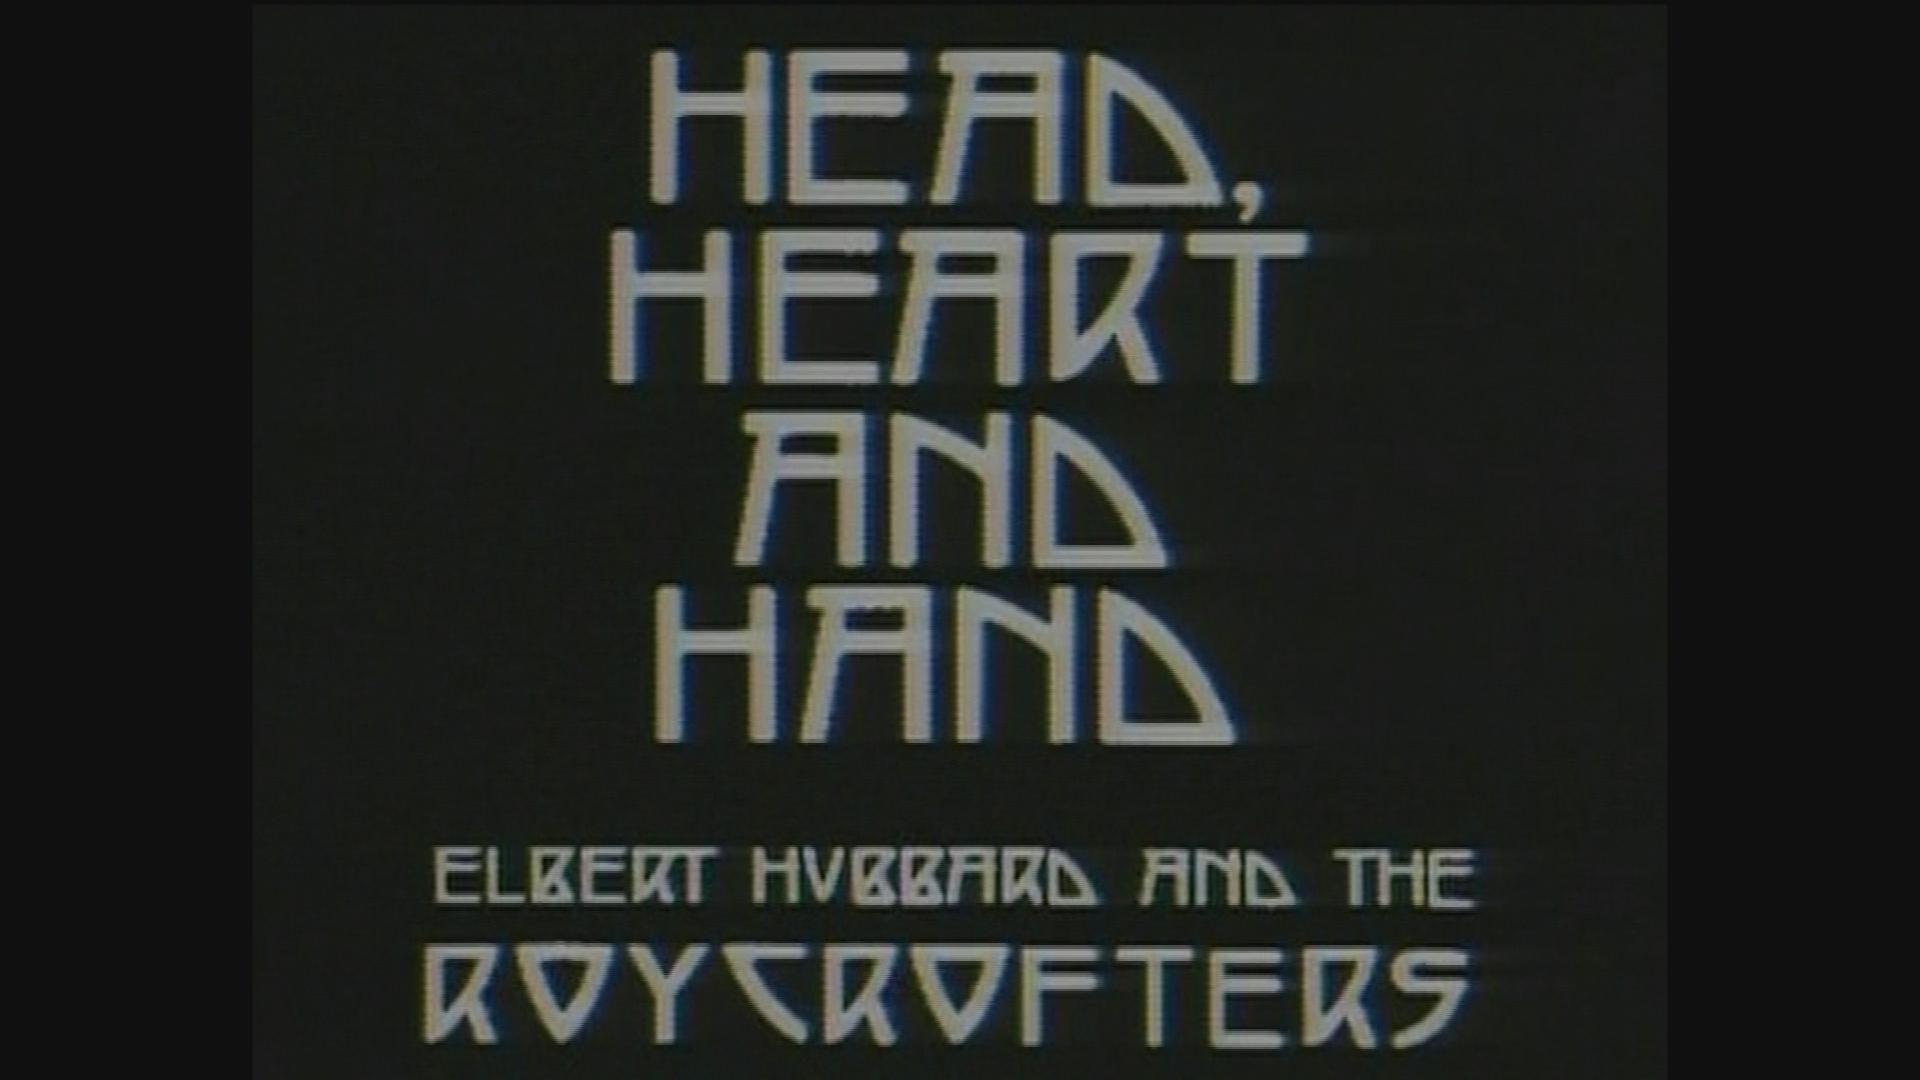 With Head Heart and Hand